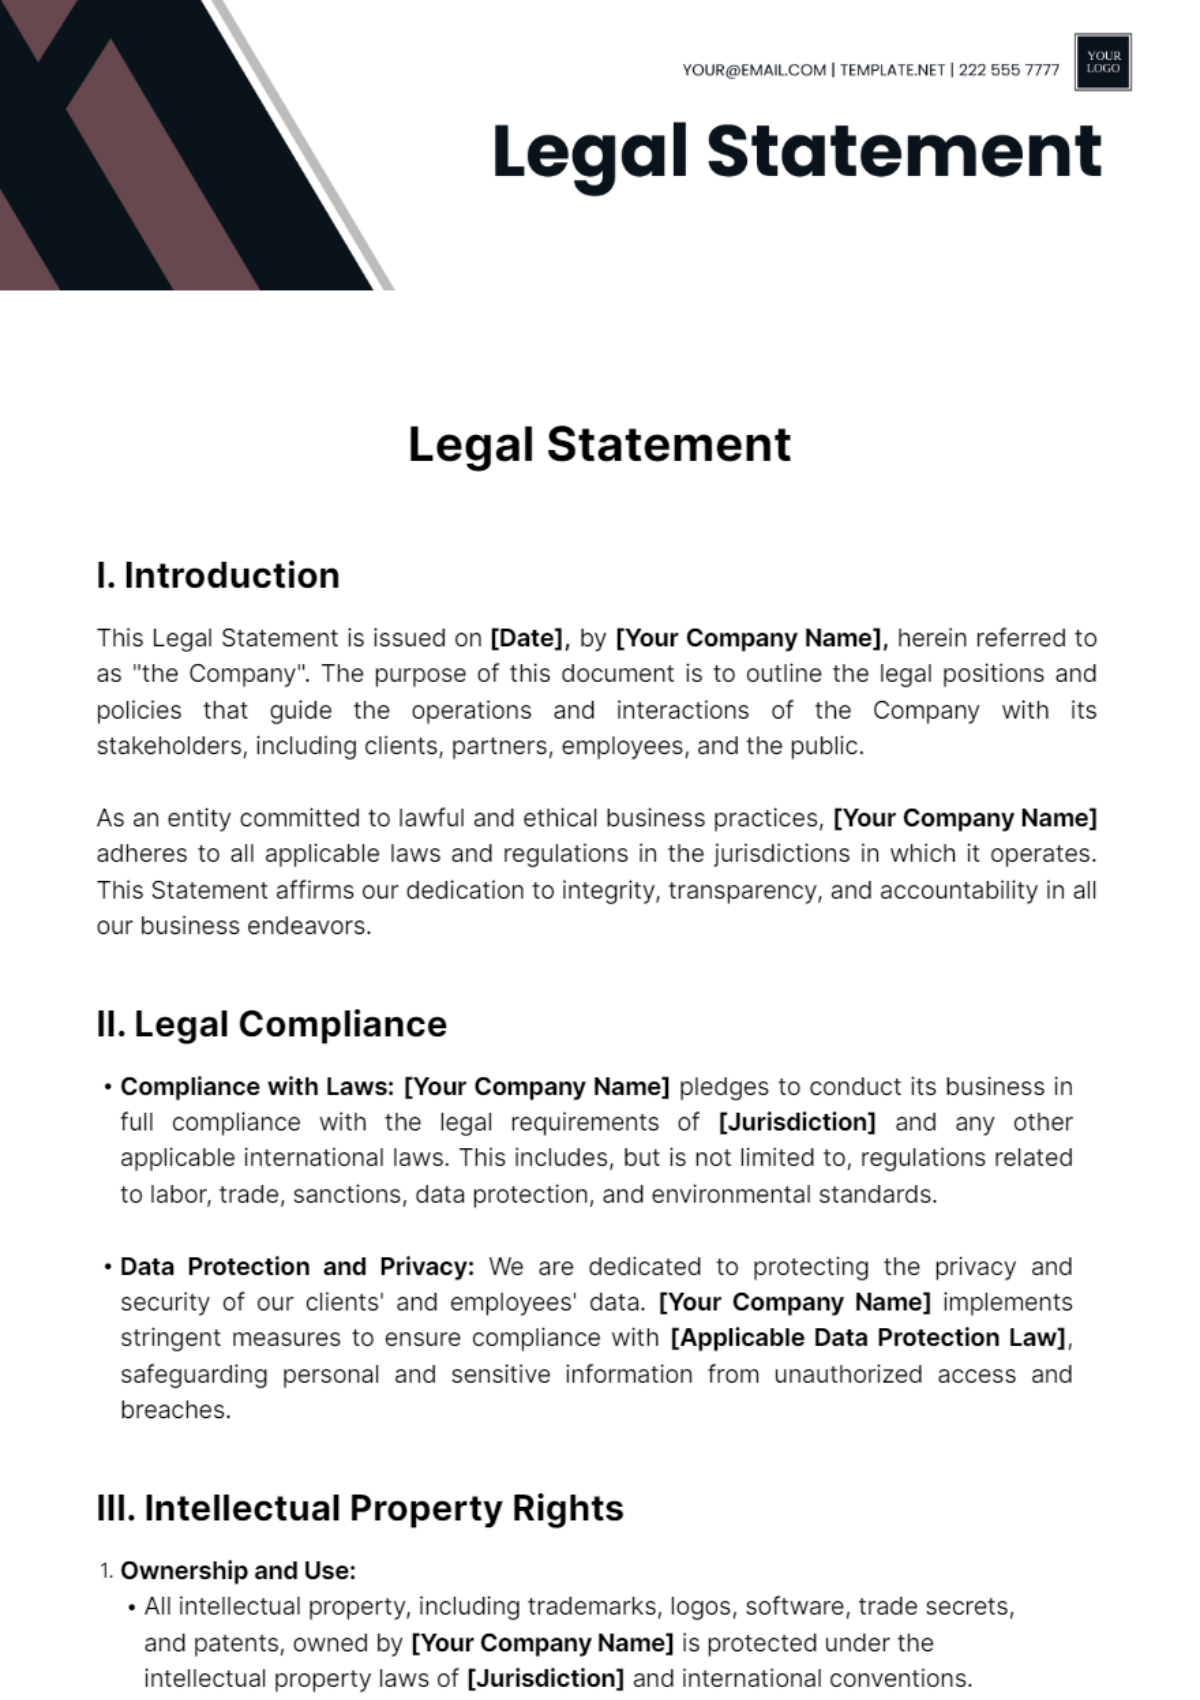 Free Legal Statement Template